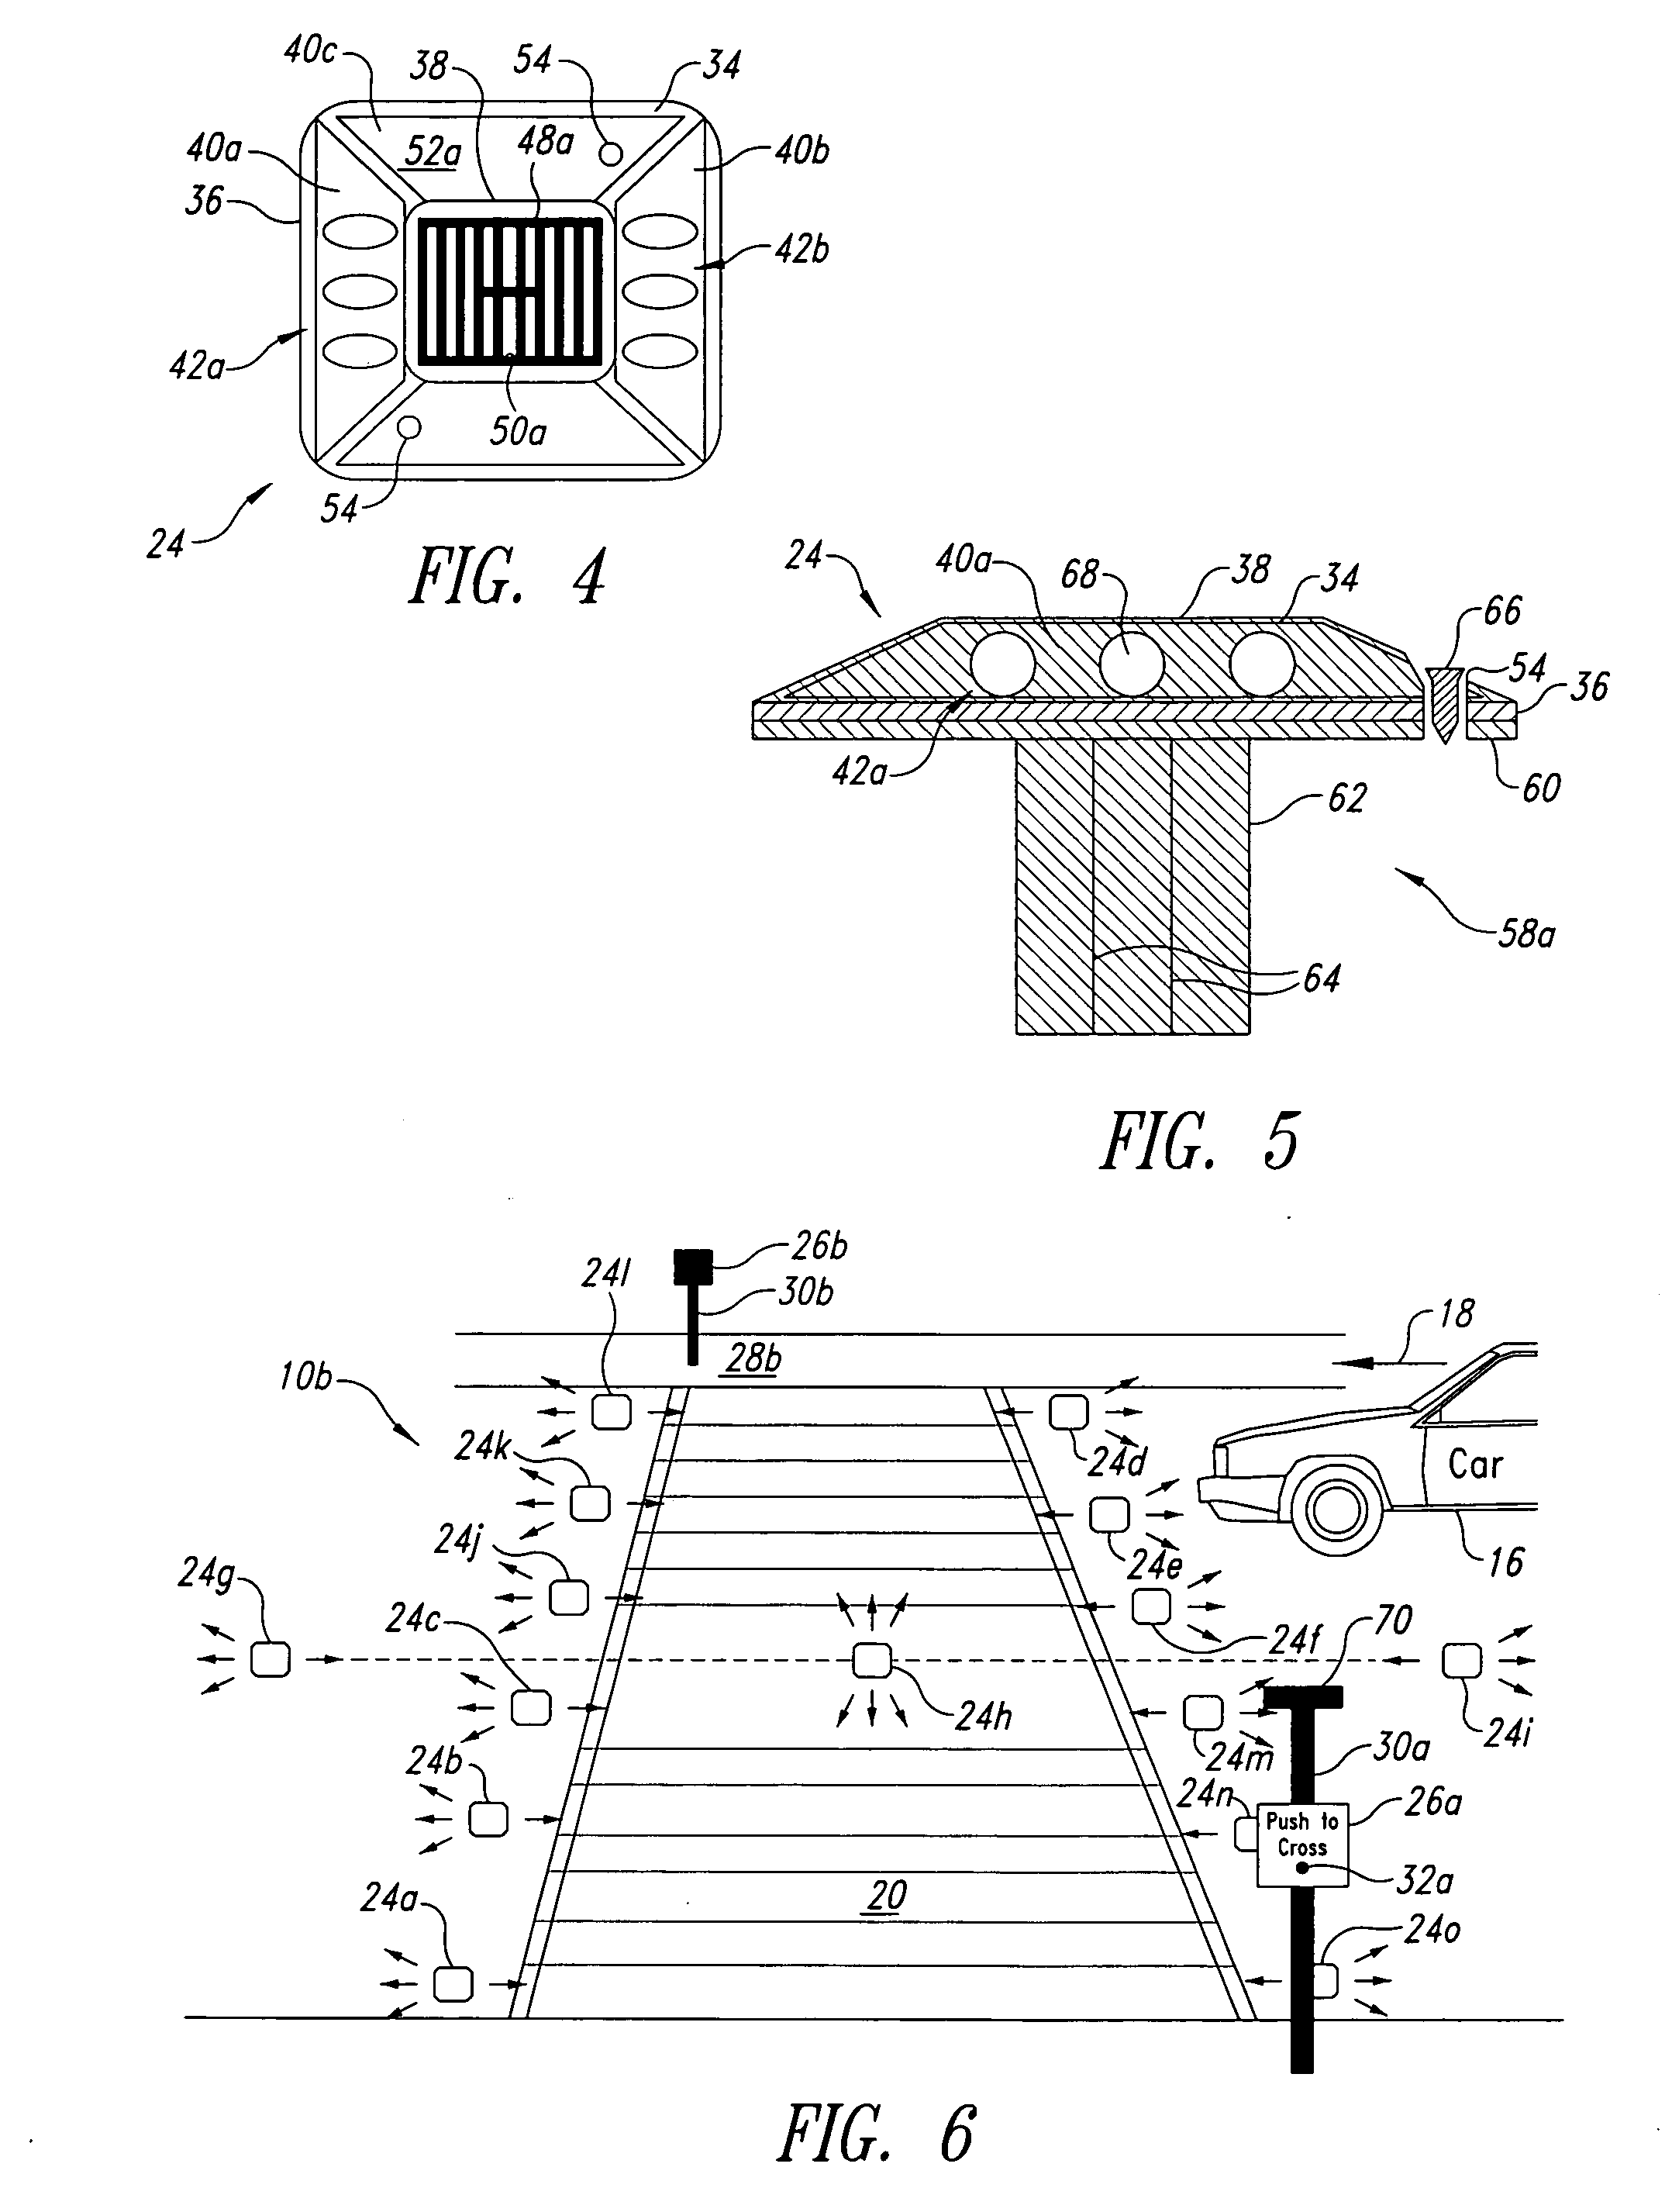 Methods, systems and devices related to road mounted indicators for providing visual indications to approaching traffic